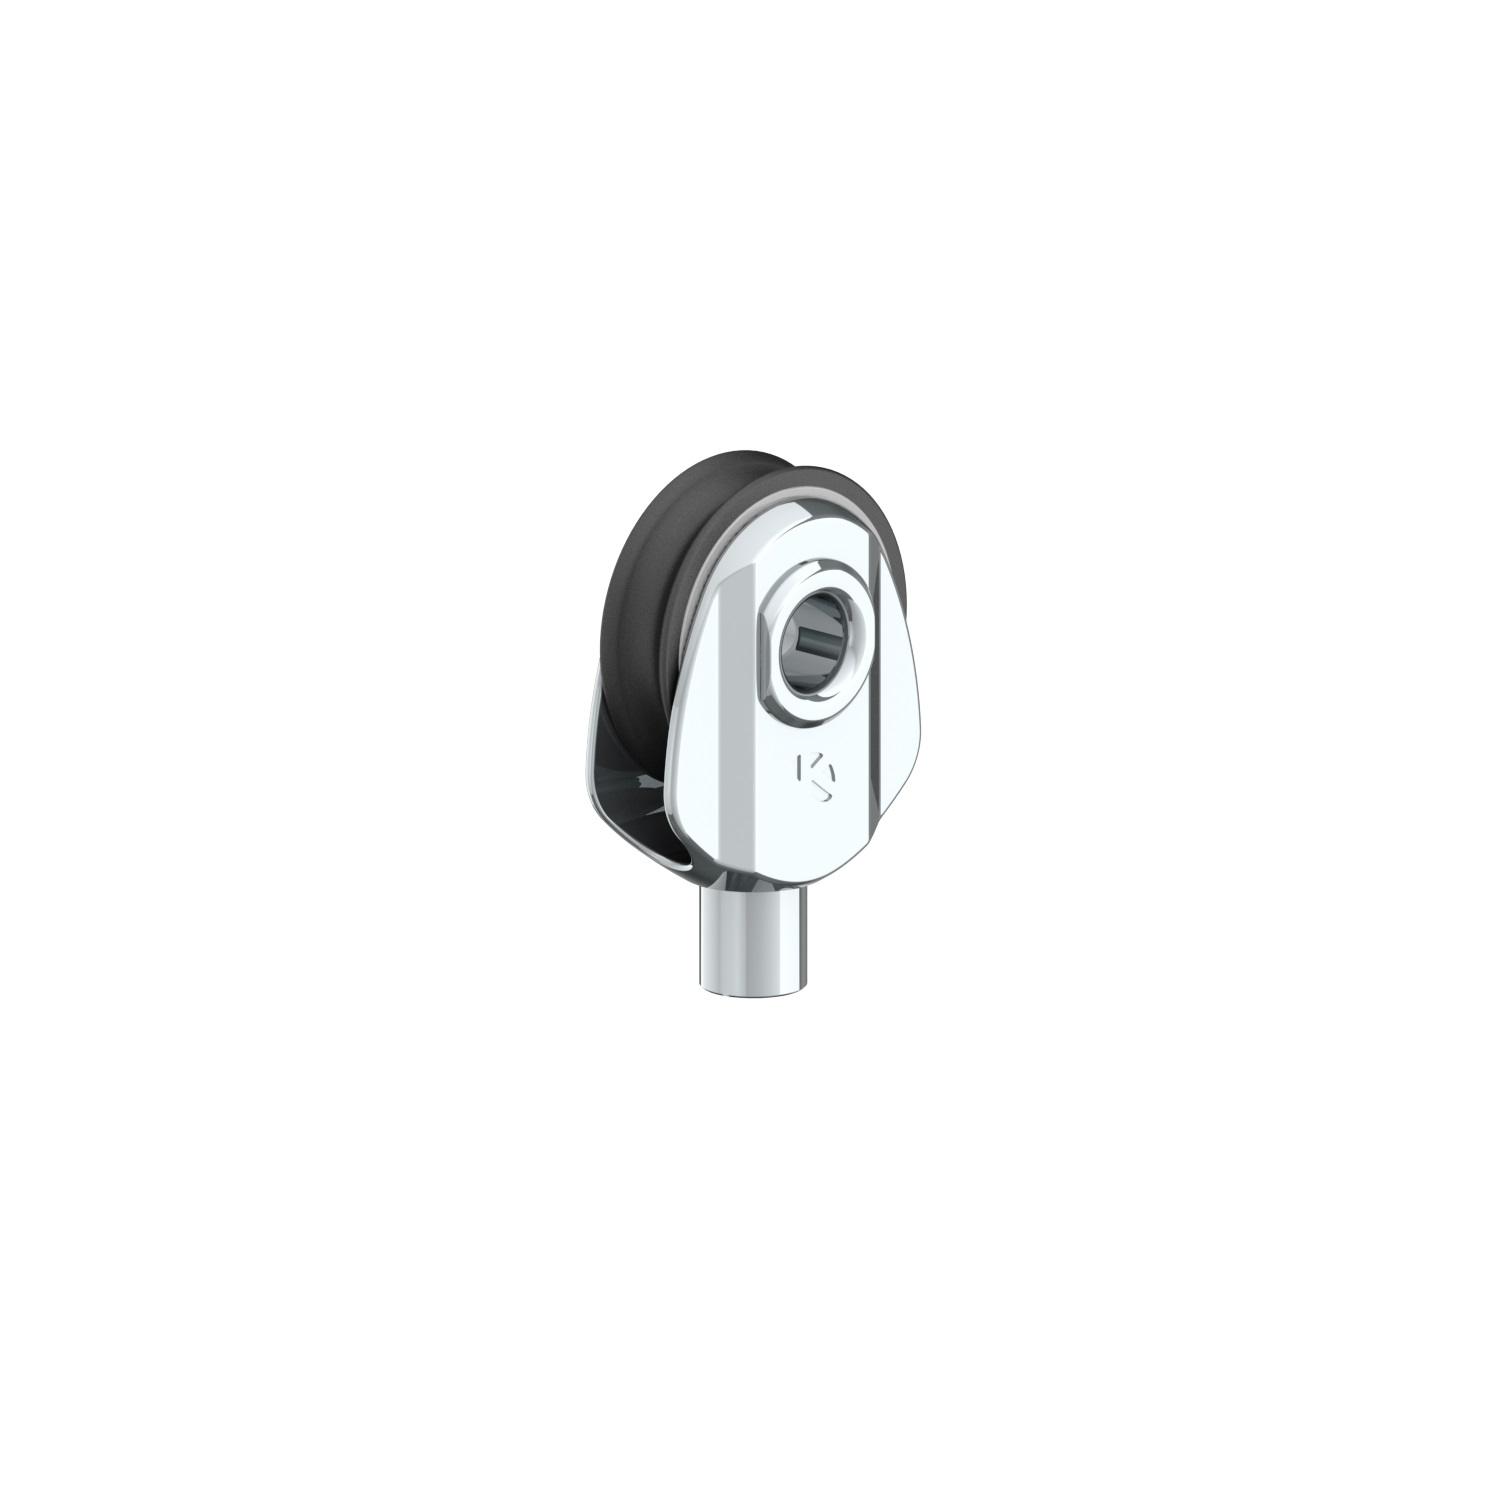 POULIE MOUFLAGE KF10/12 (INOX) - Karver systems